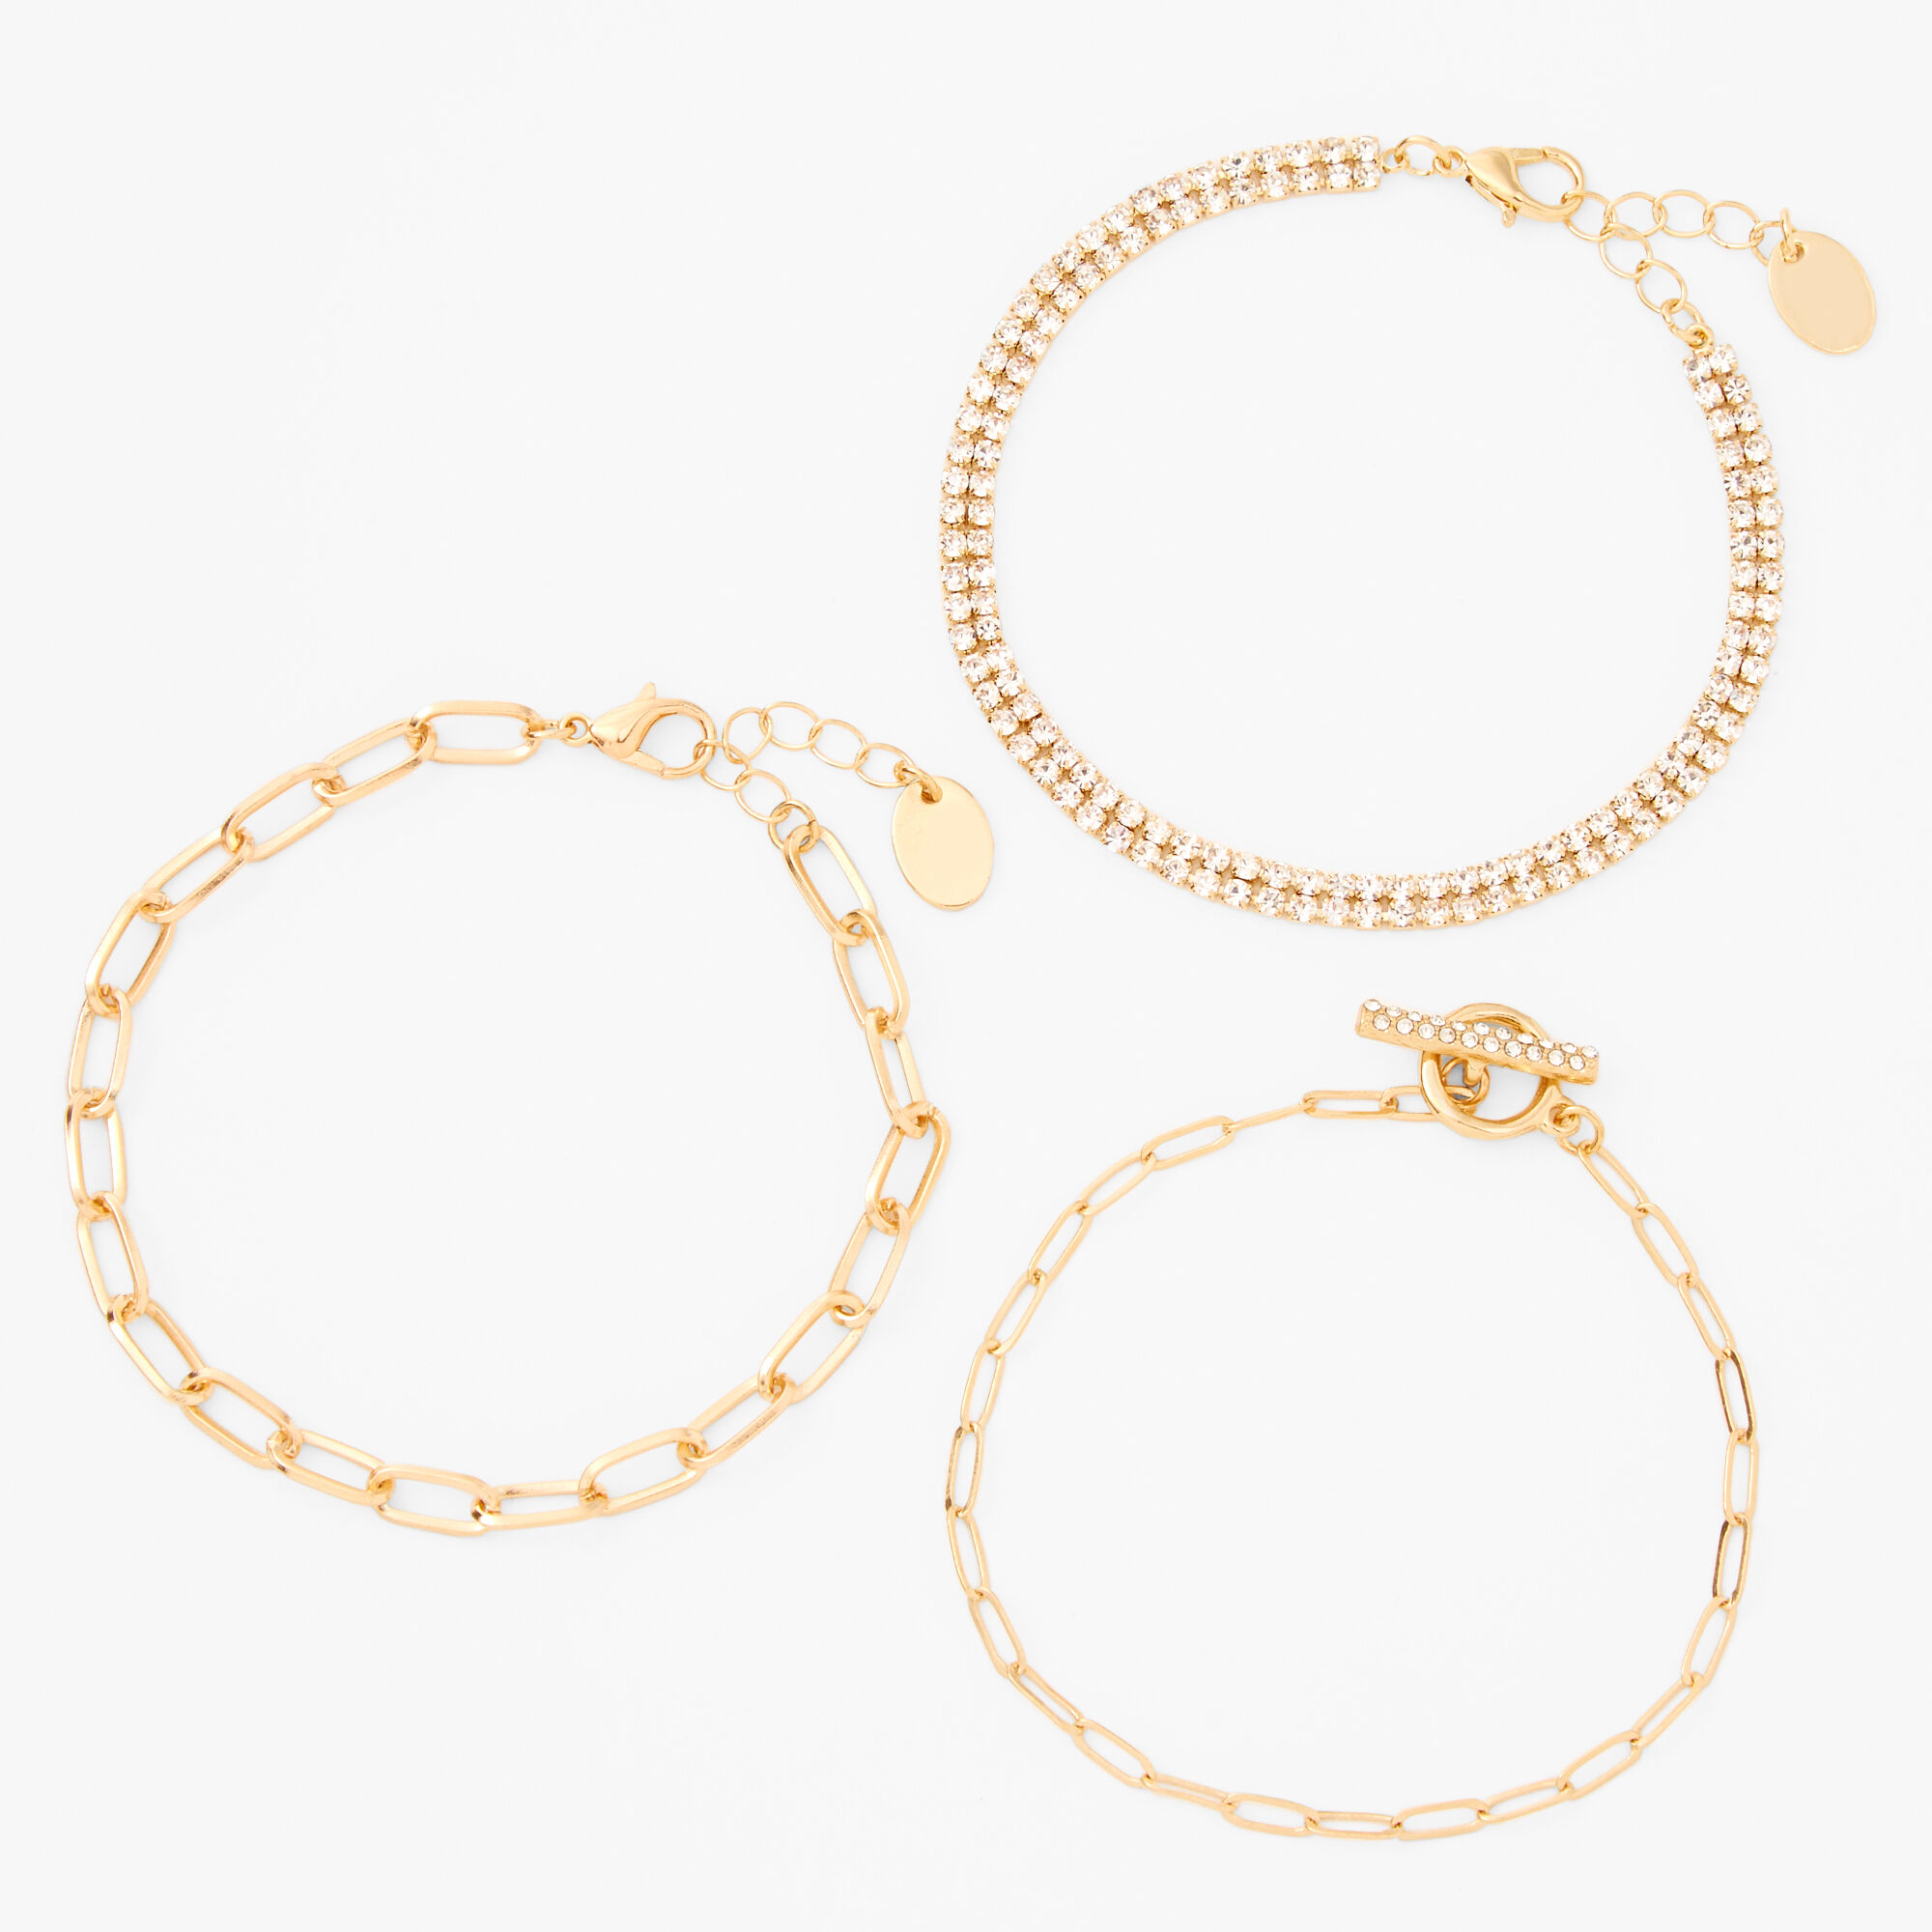 View Claires Tone Toggle Chainlink Rhinestone Bracelets 3 Pack Gold information